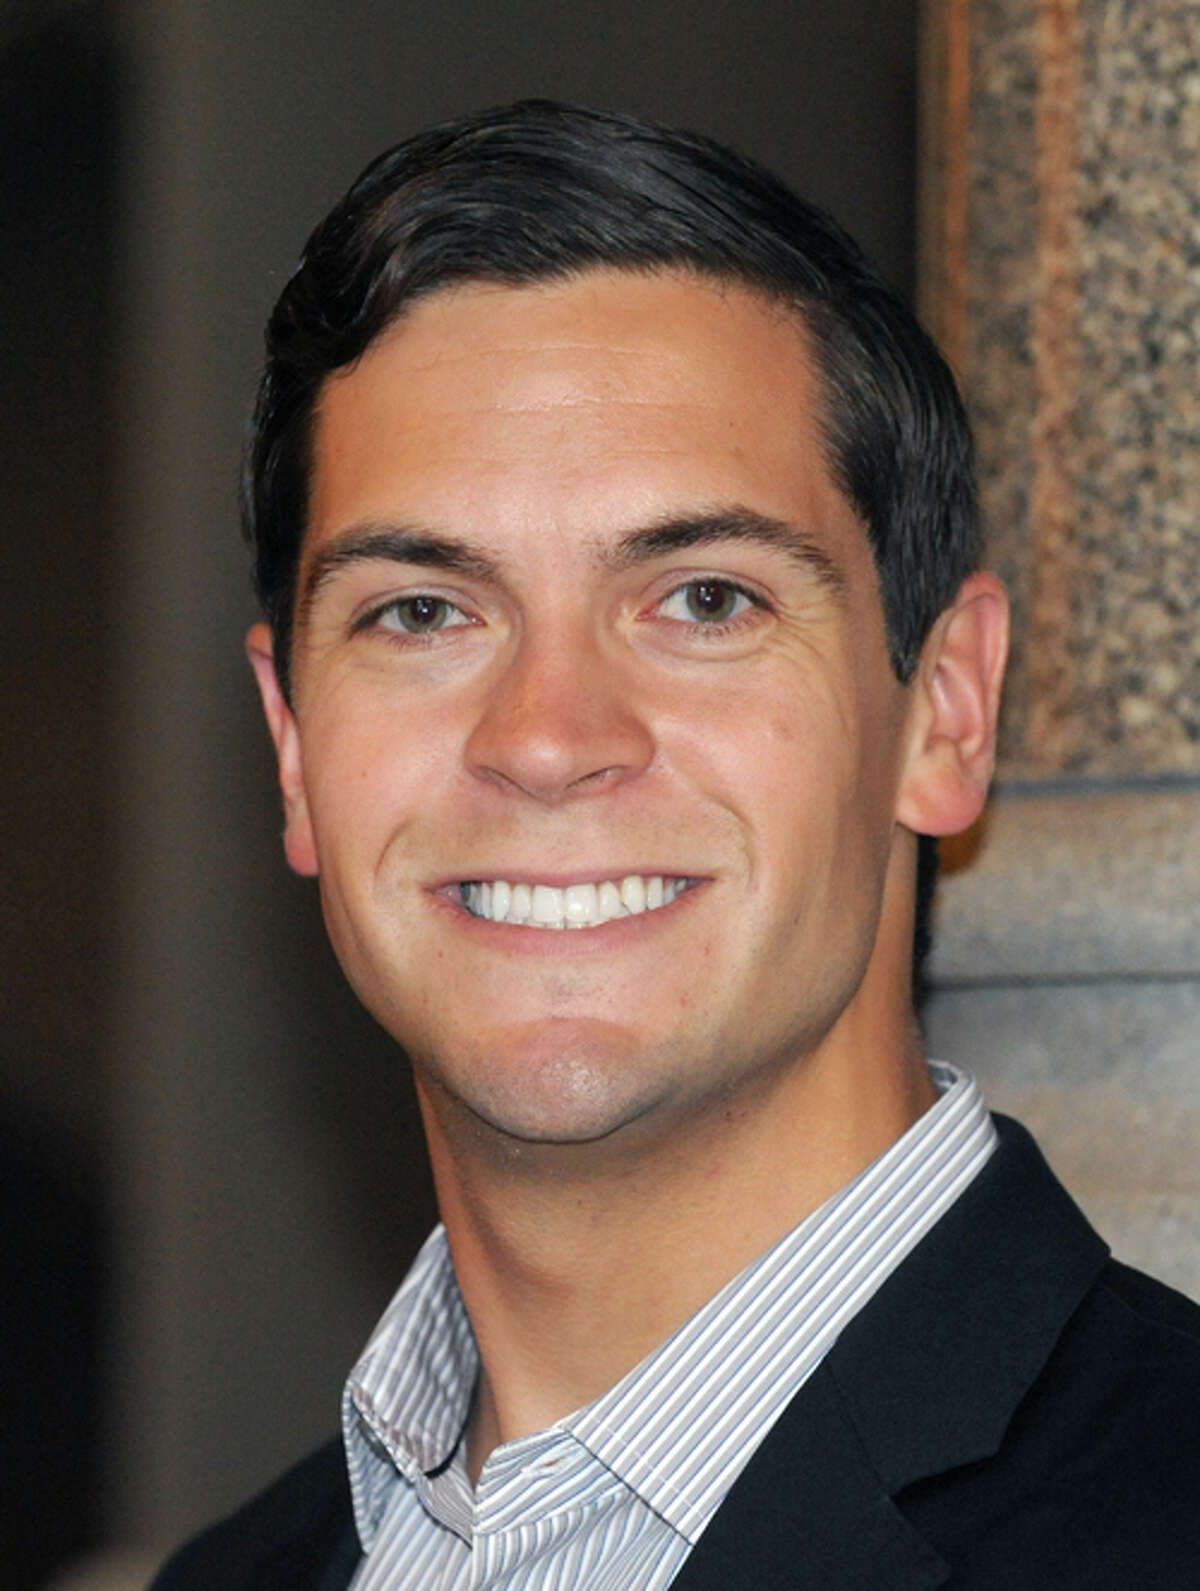 Democratic candidate for New York's 19th congressional district Sean Eldridge on Wednesday May 14, 2014 in Albany, N.Y. (Michael P. Farrell/Times Union)